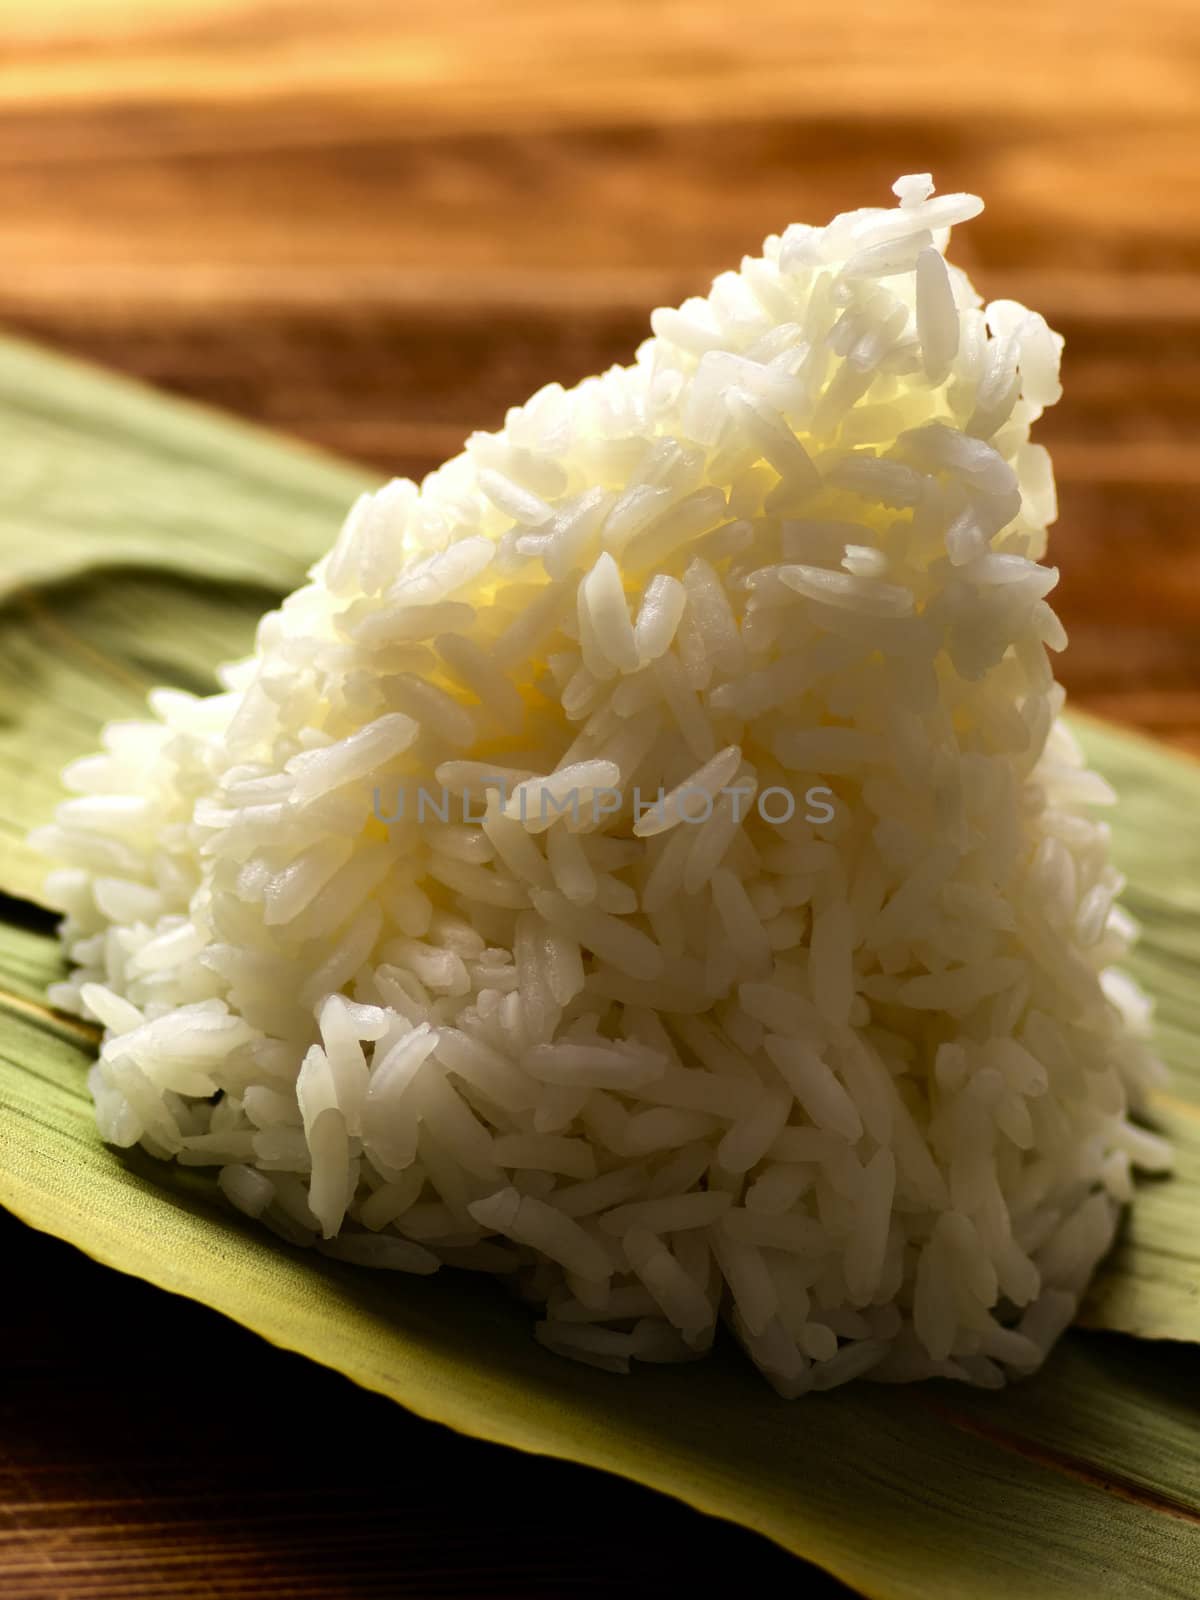 steamed white rice by zkruger